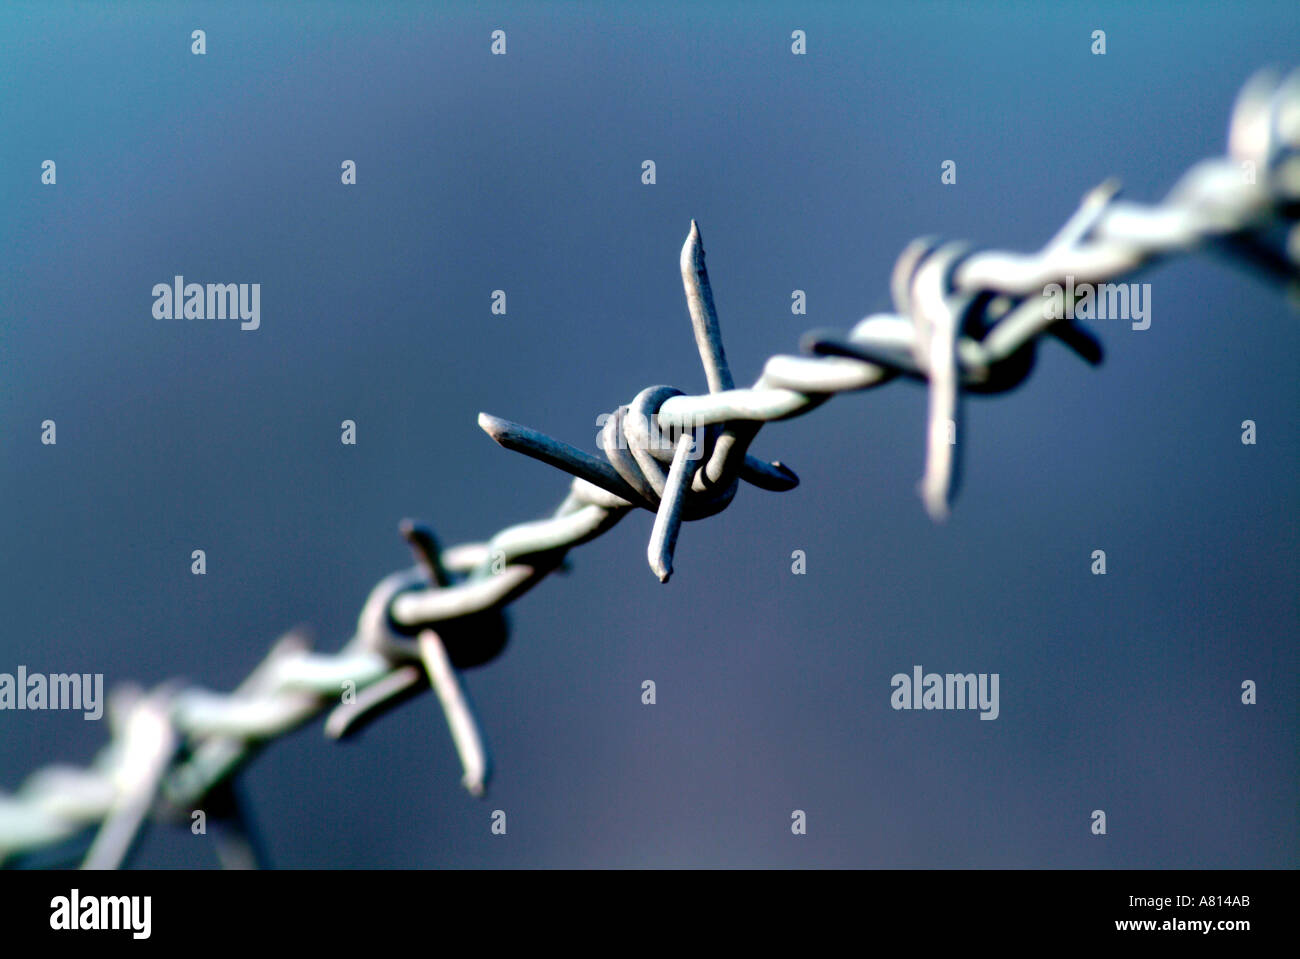 Section of barbed wire Stock Photo